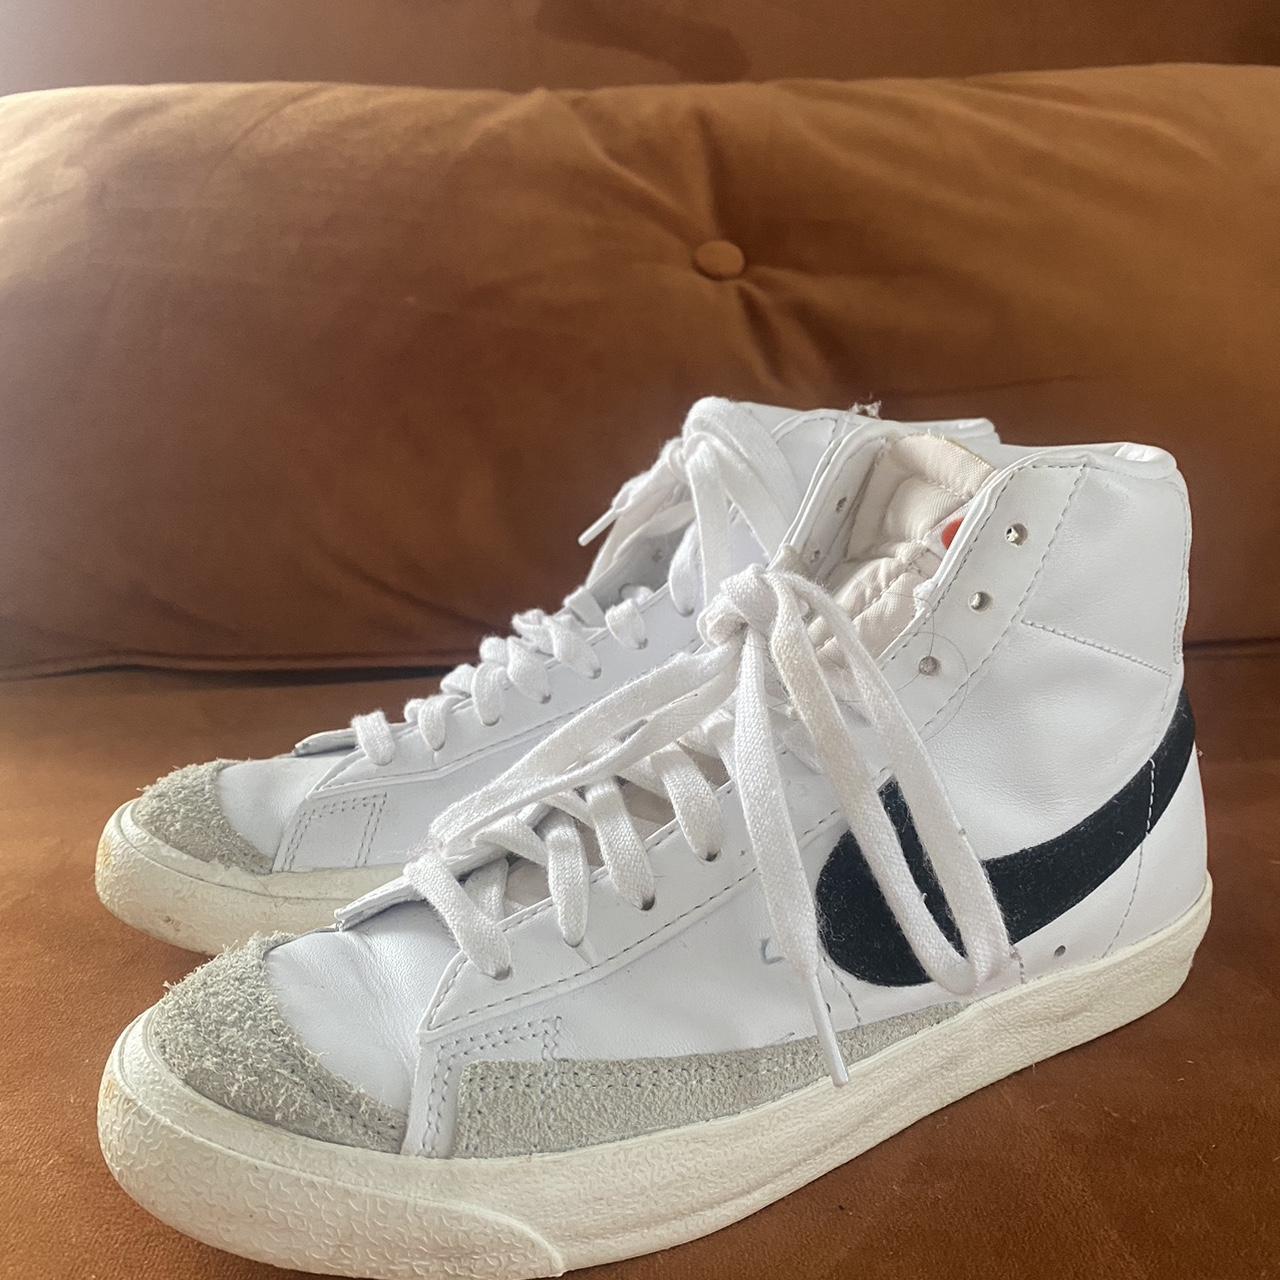 Nike Women's White and Black Trainers | Depop